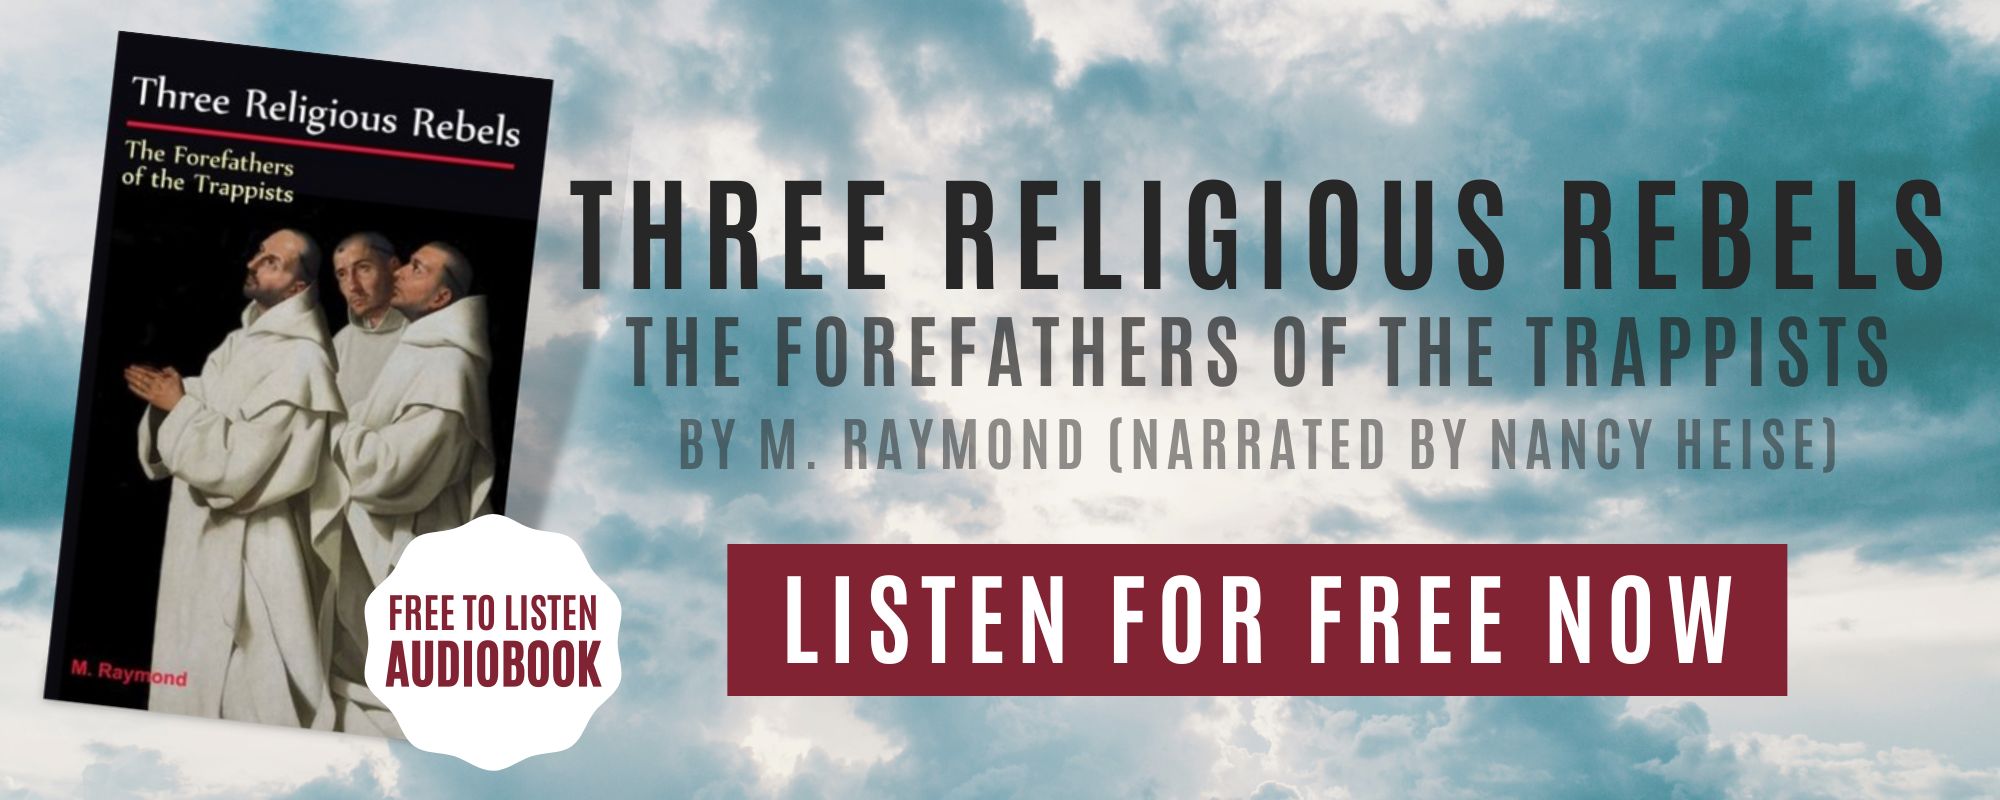 Three Religious Rebels Forefathers of the Trappist Monks Audio Book